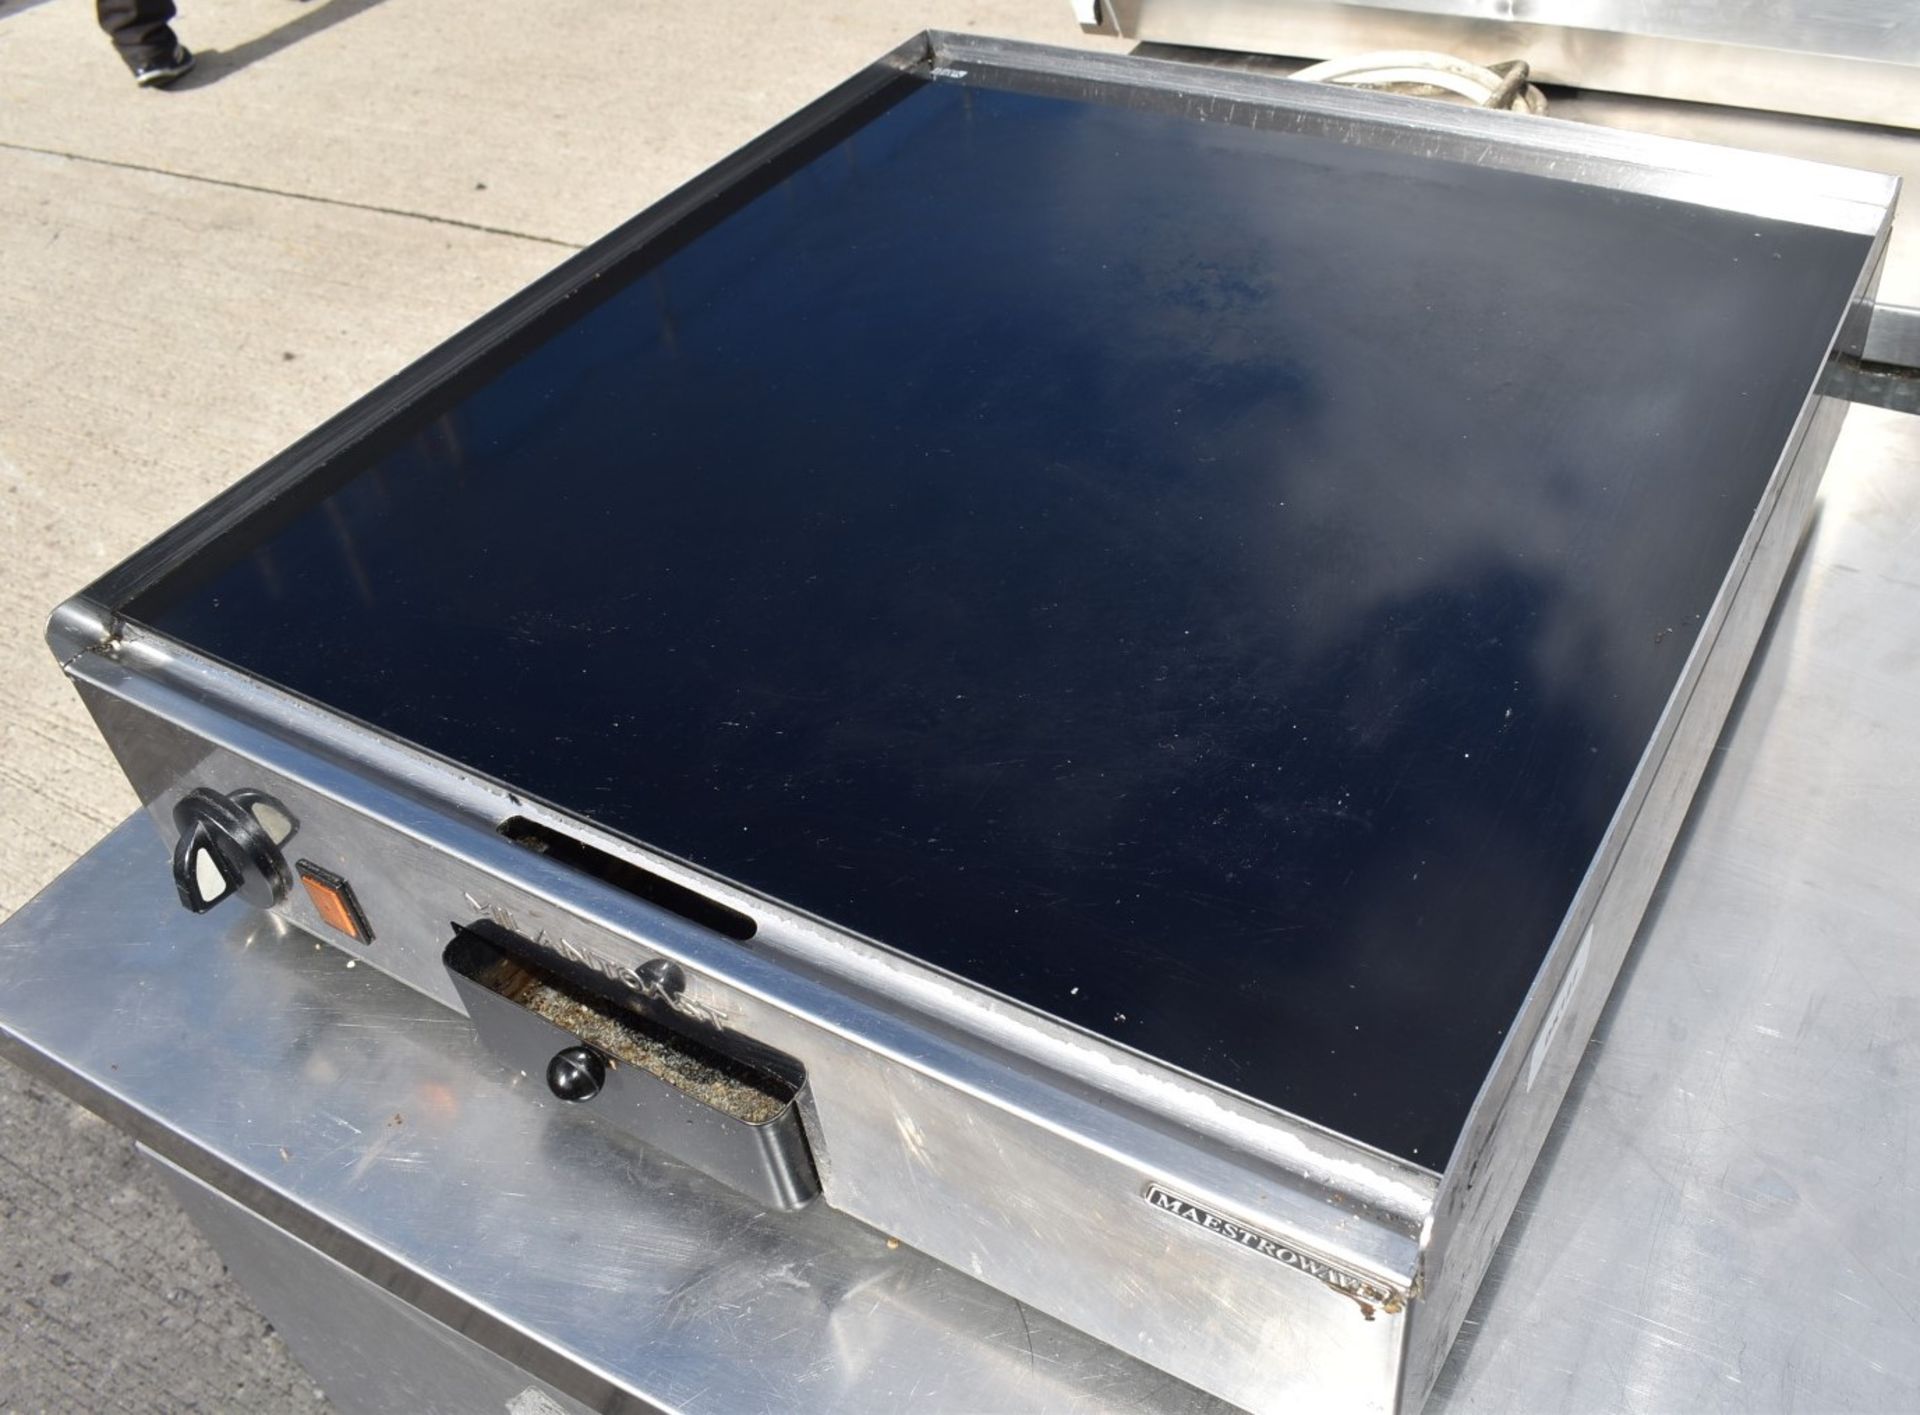 1 x Maestrowave Milantoast Countertop Ceramic Hotplate - 240v - Recently Removed From a Dark Kitchen